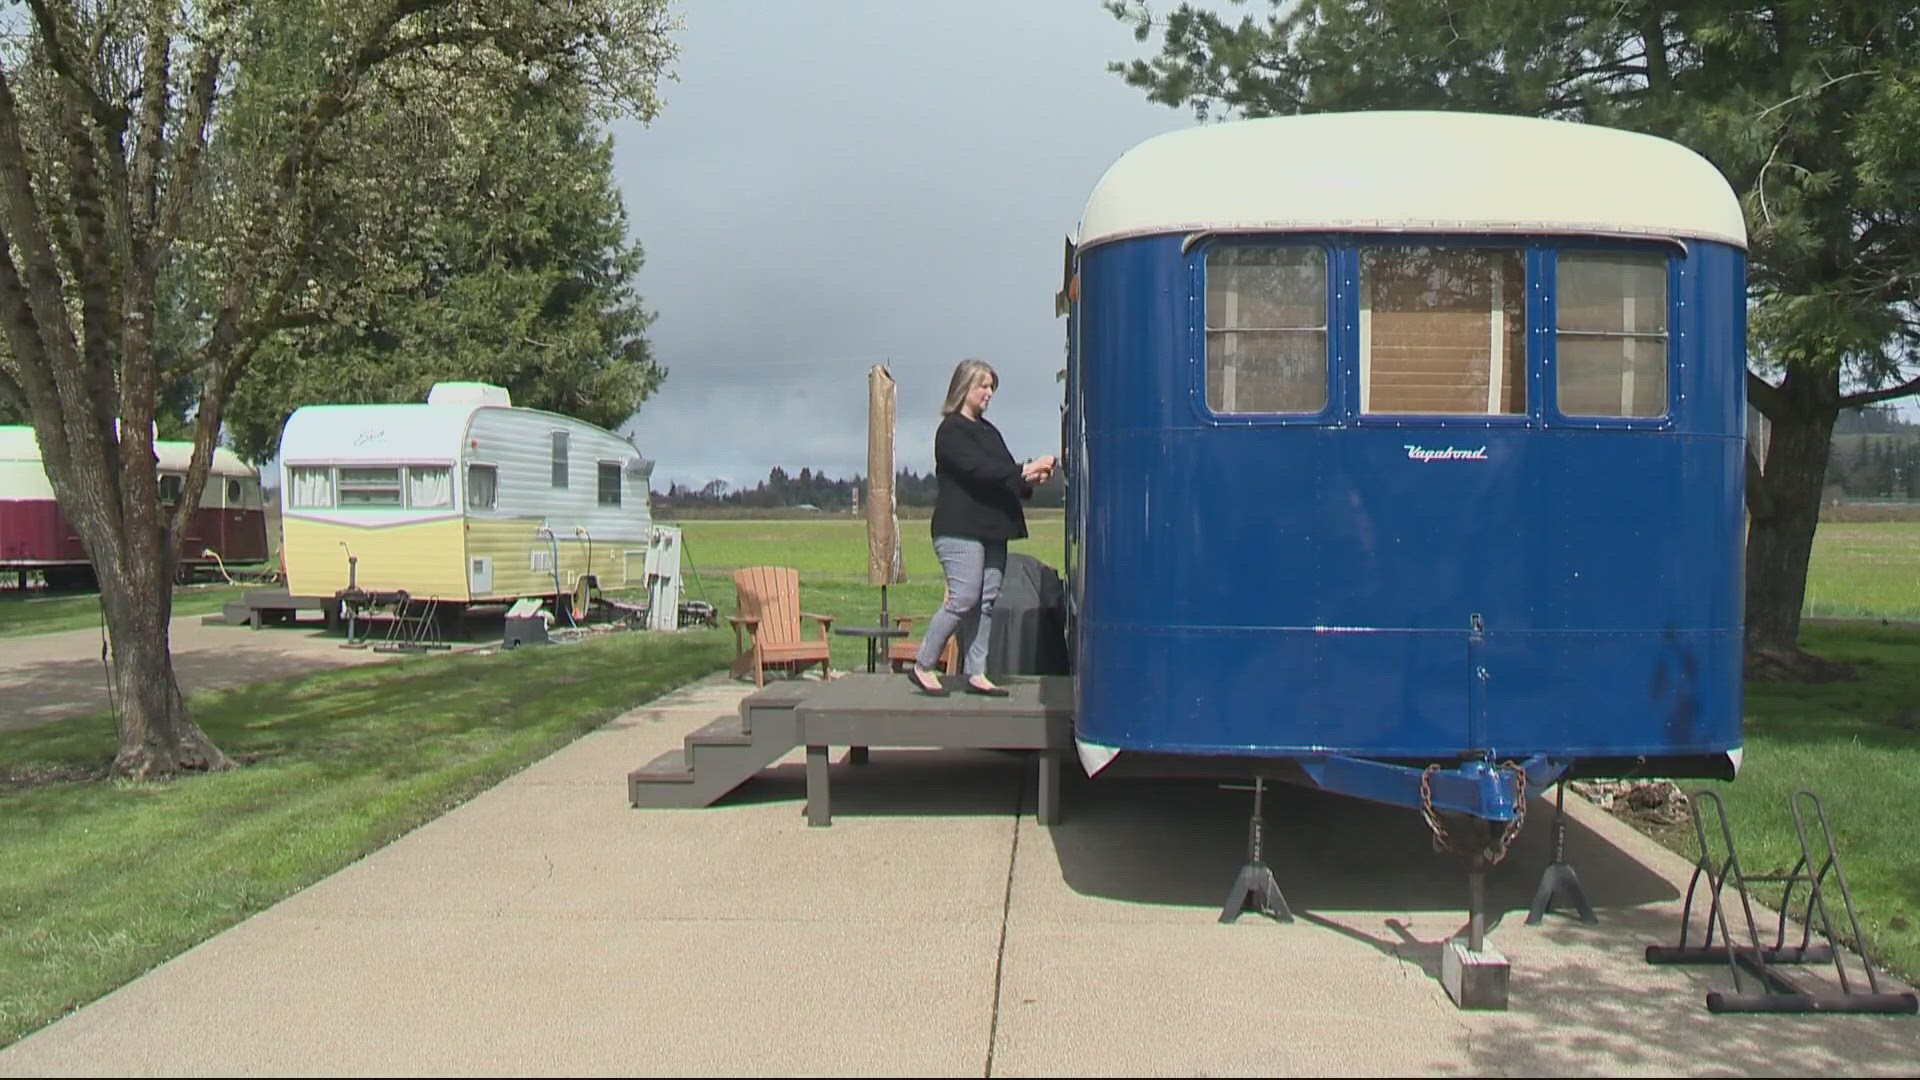 The Vintages in Dayton, Oregon offers 36 restored trailer rentals which includes a complimentary passport deal at participating venues in the area